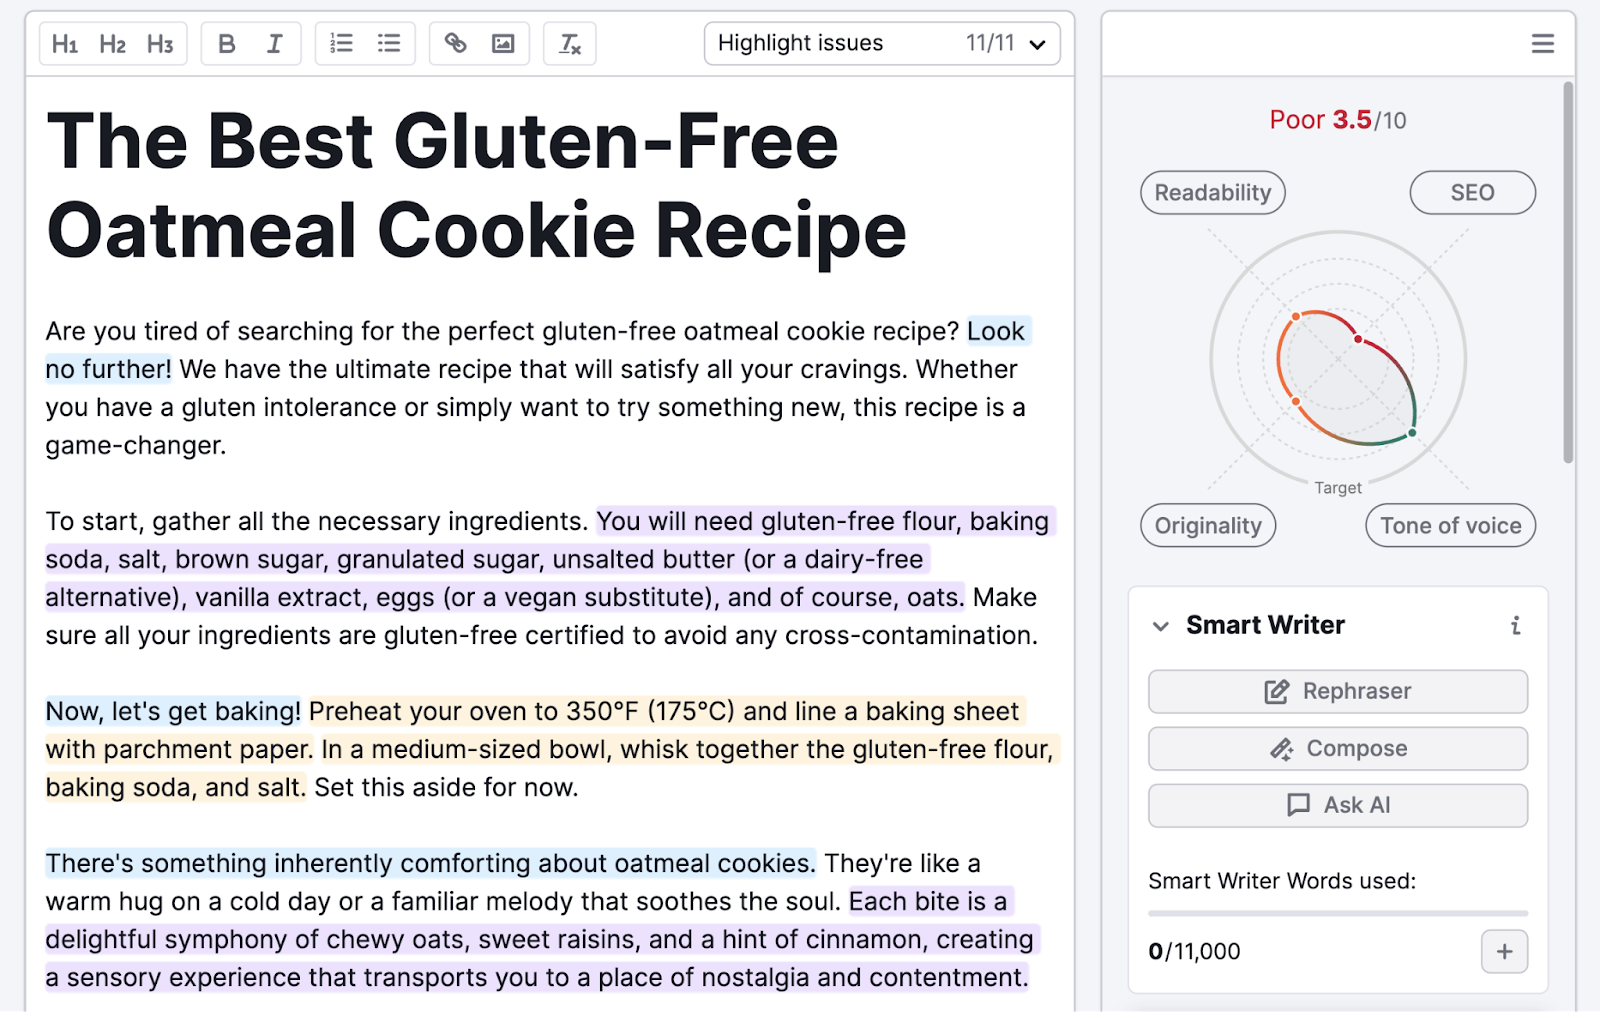 Draft for best gluten-free oatmeal cookie recipe has a score of 3.5 out of 10.